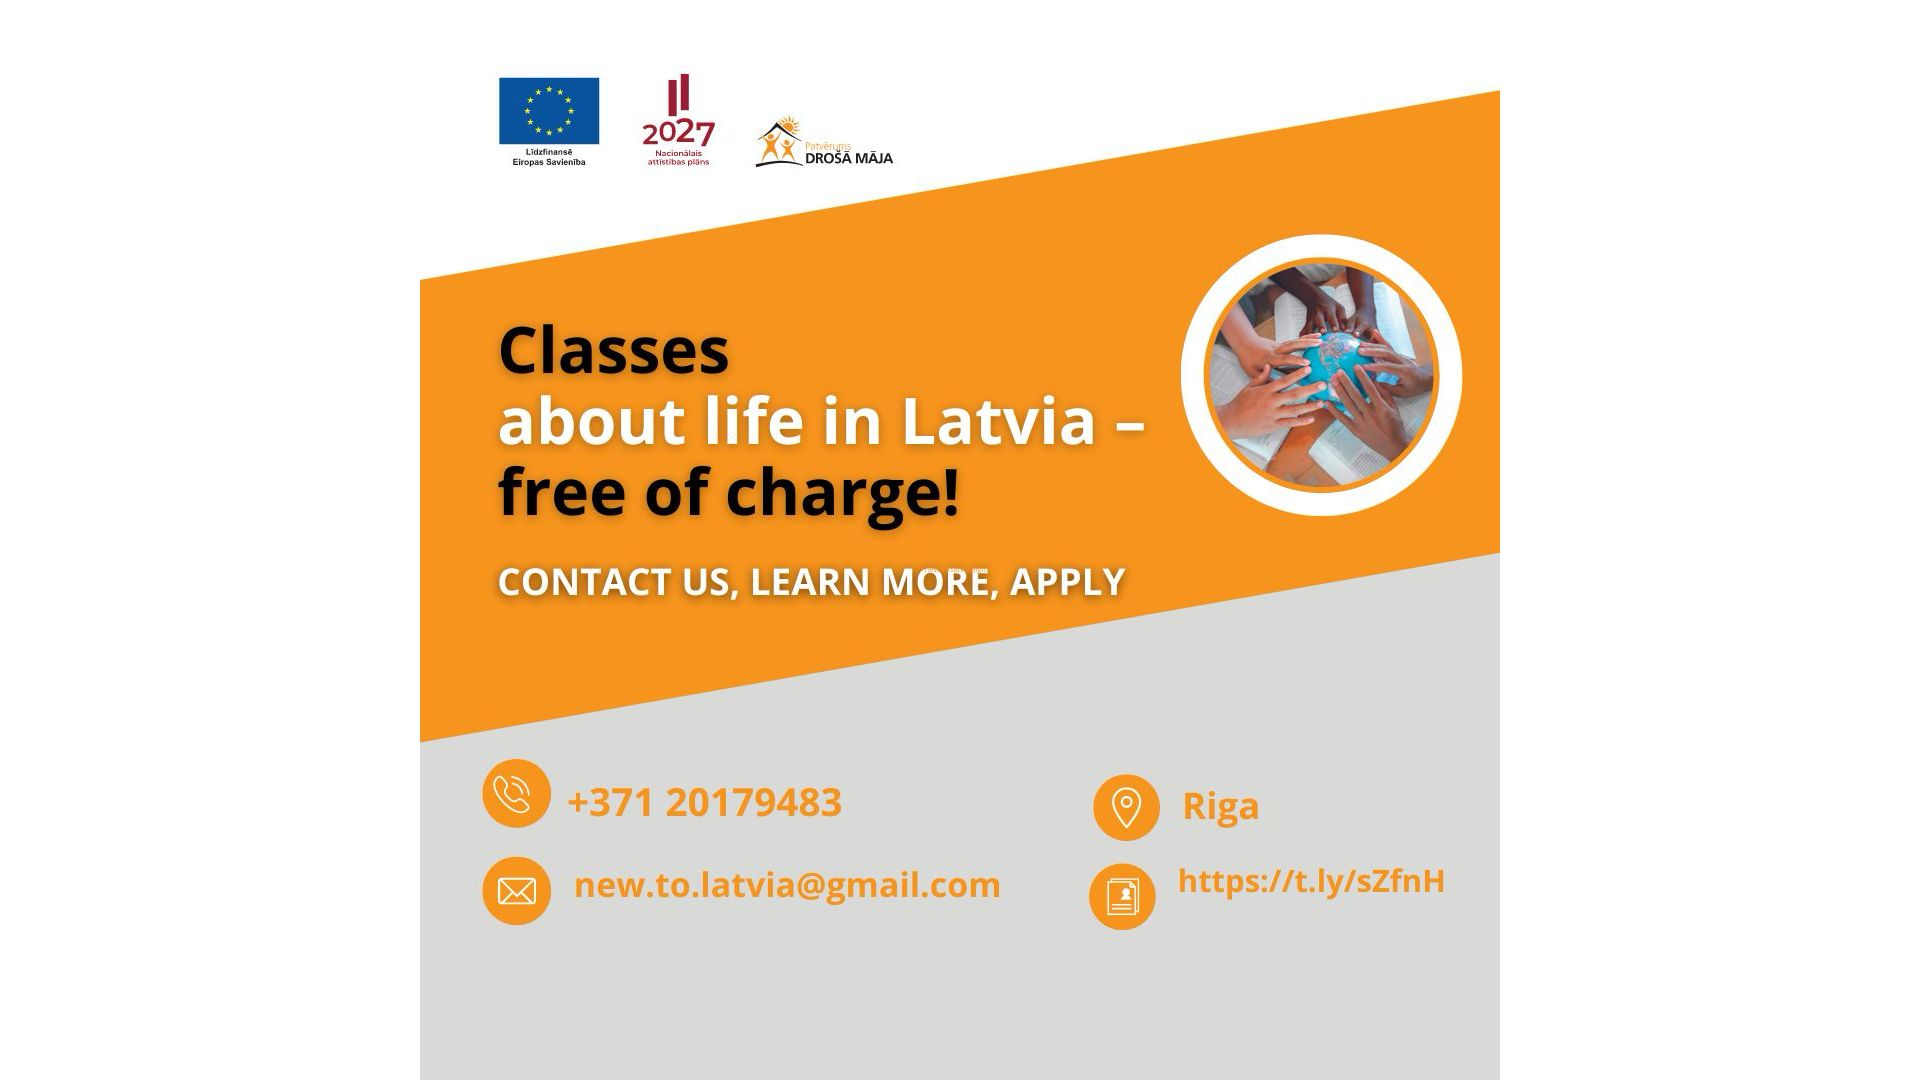 Invitation to workshops about diffrent aspects of life in Latvia